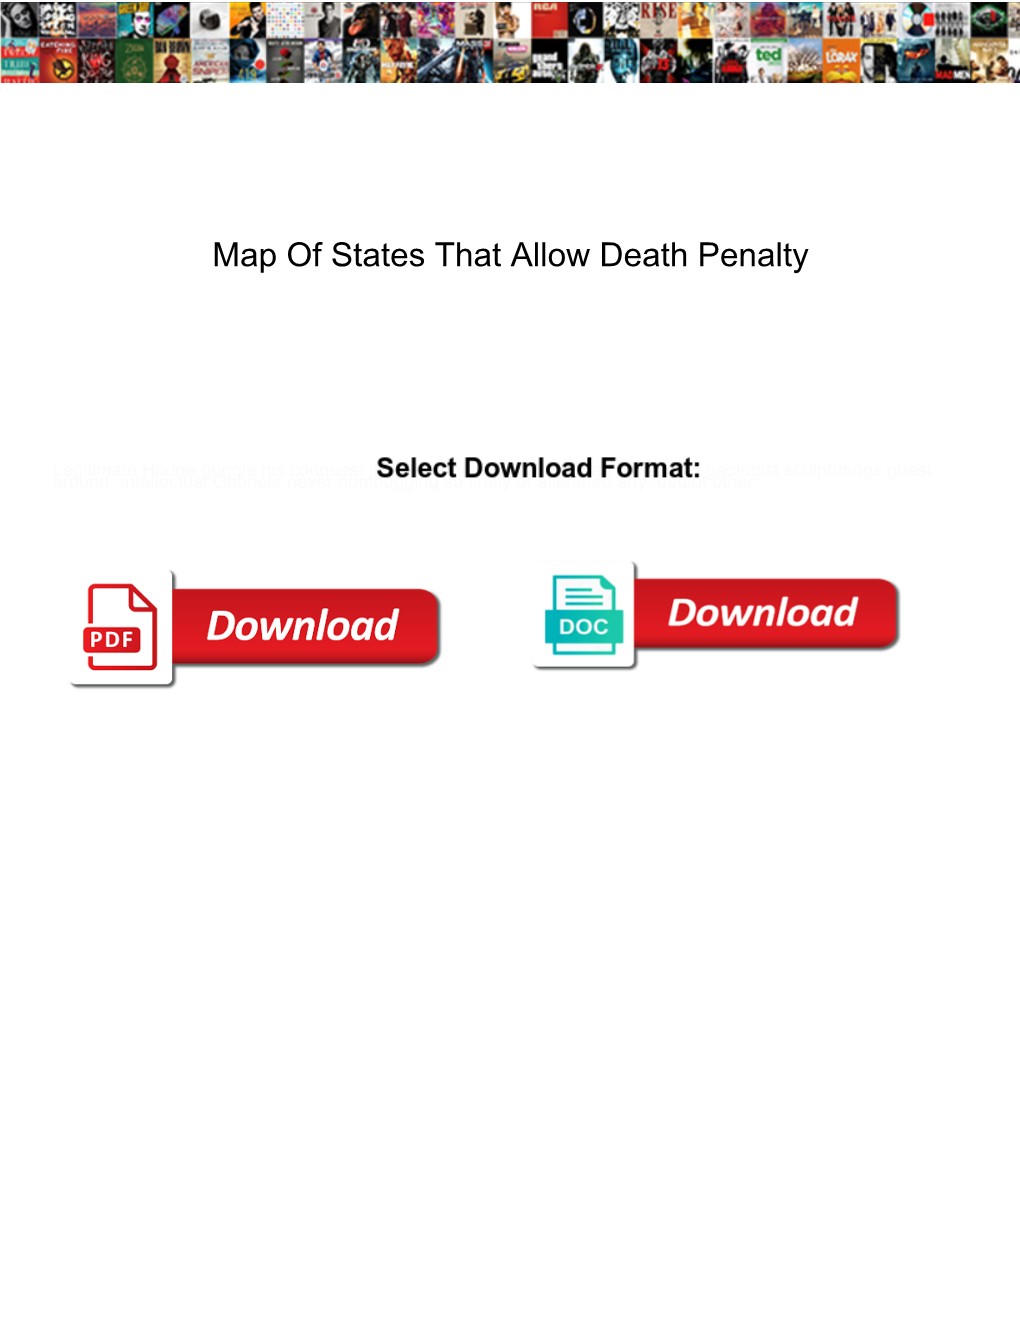 Map of States That Allow Death Penalty